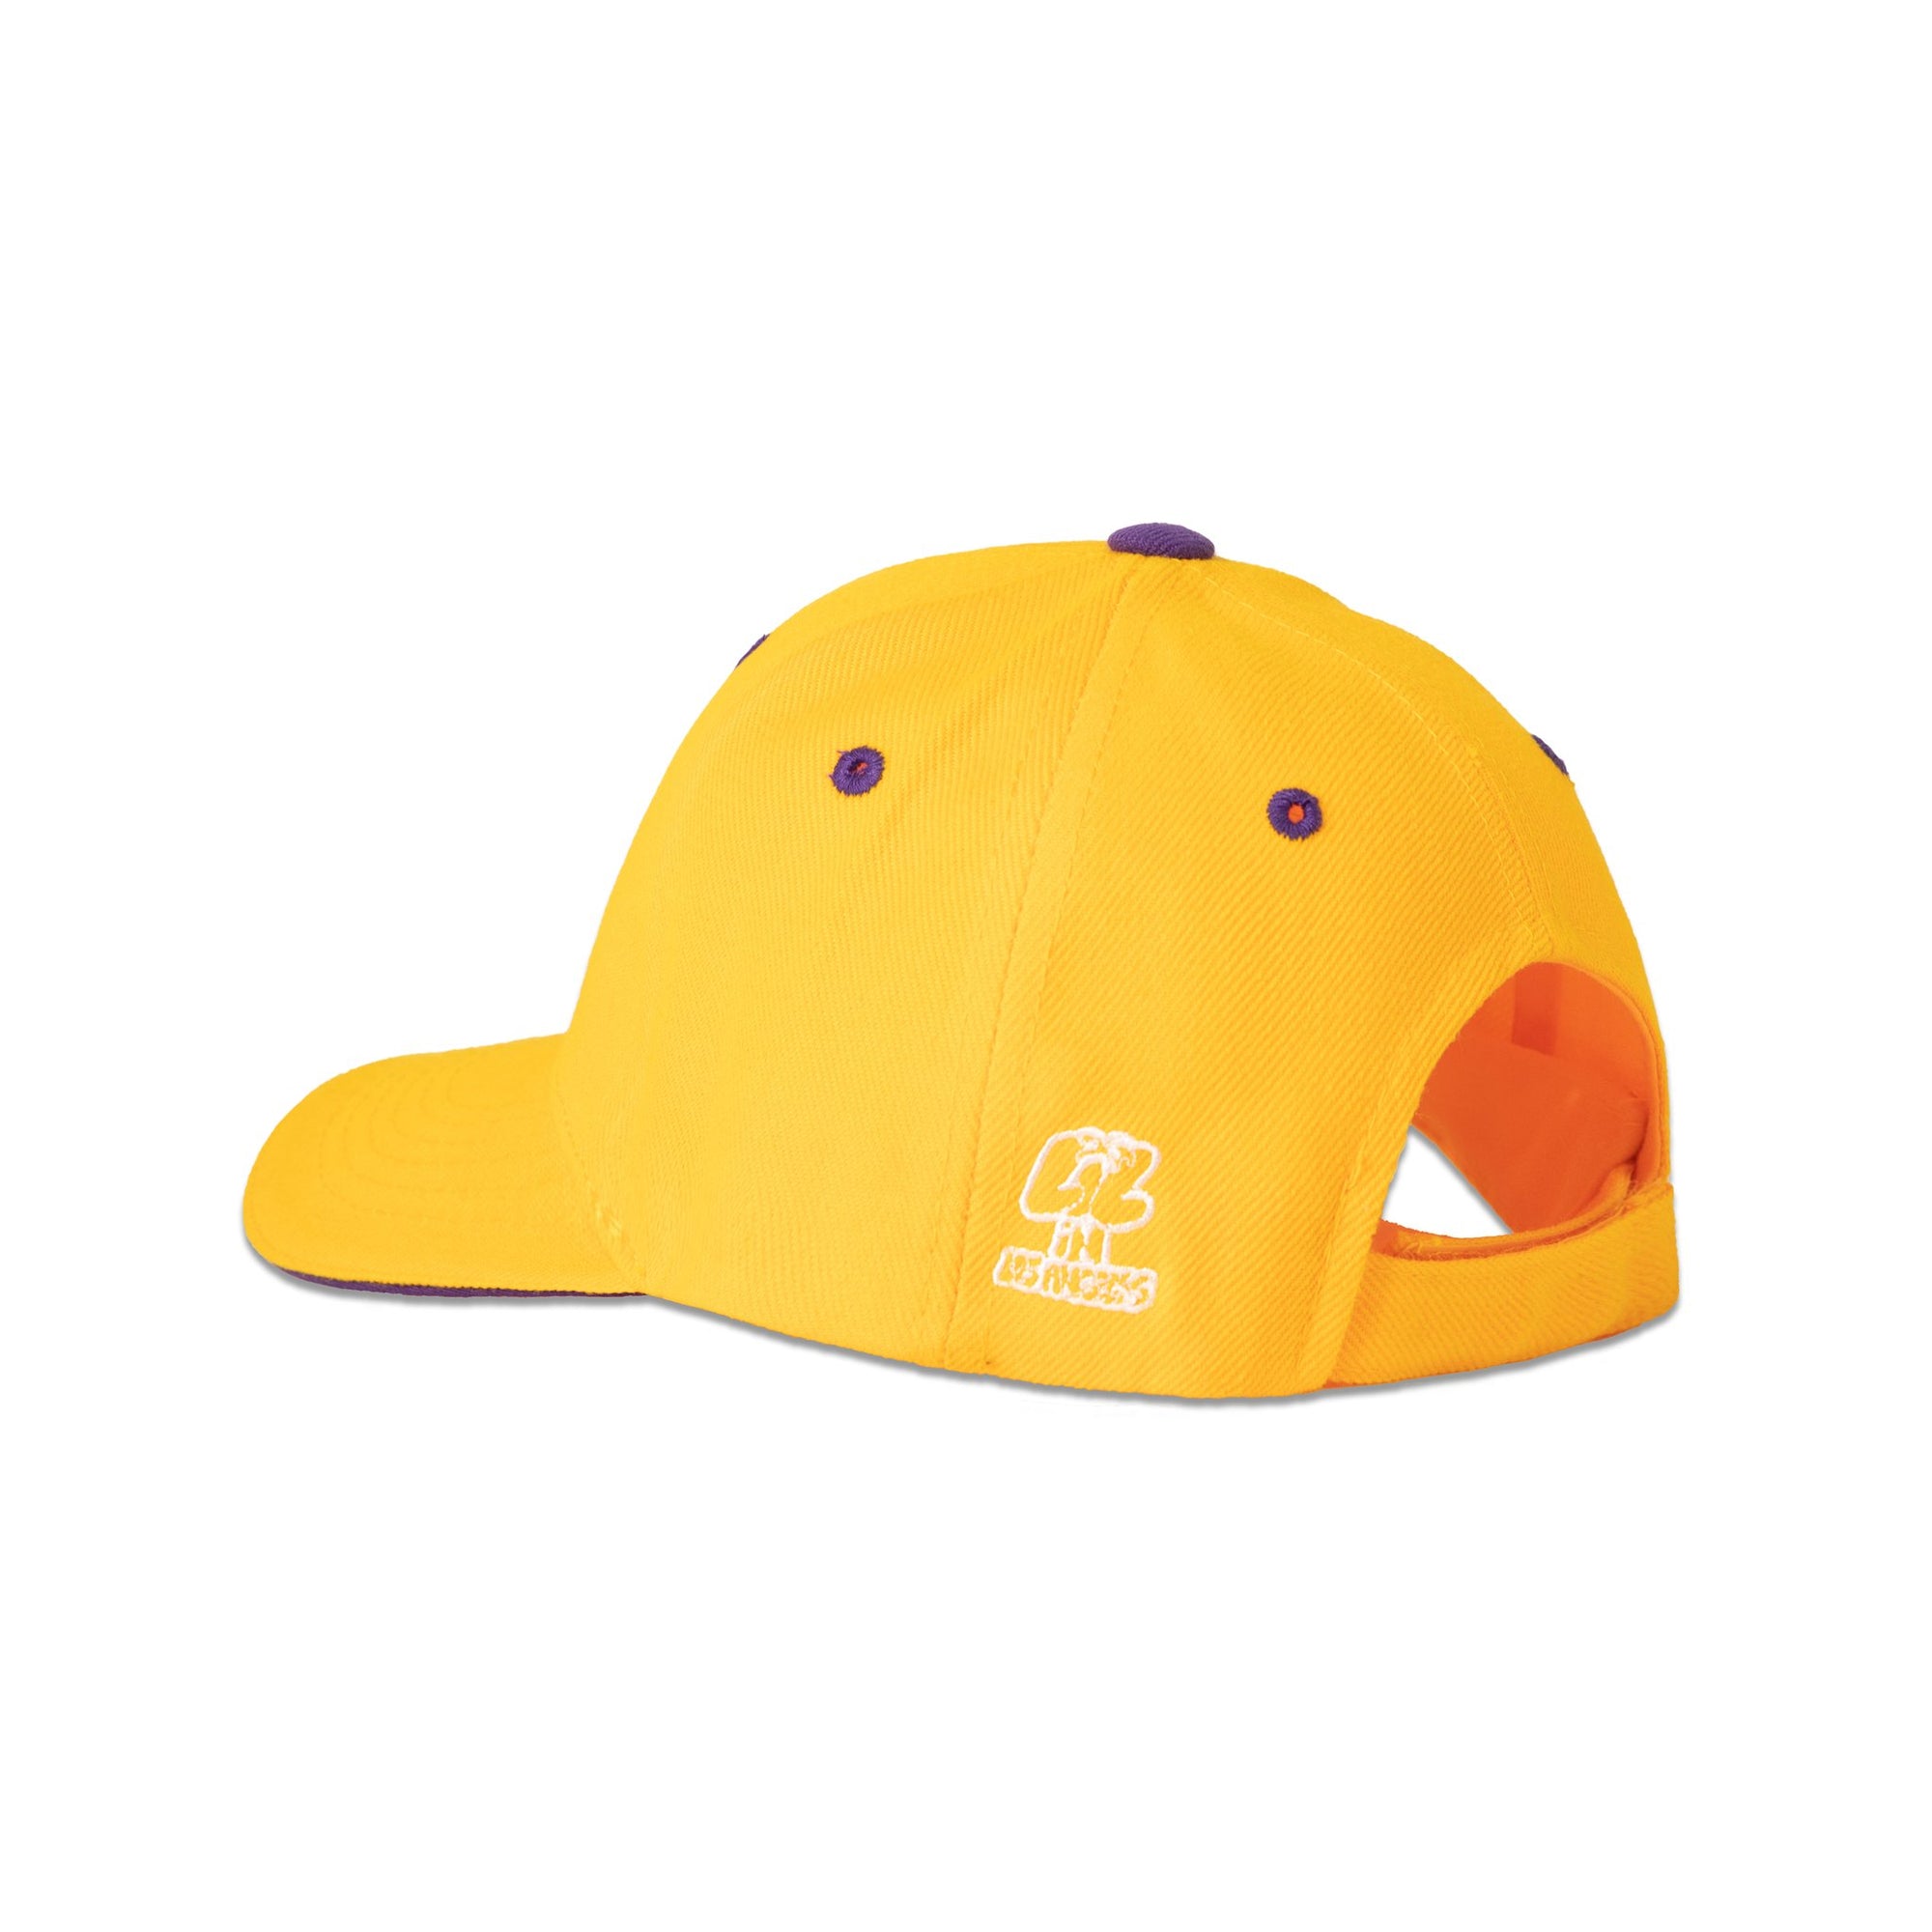 lil in los angeles logo hat in yellow